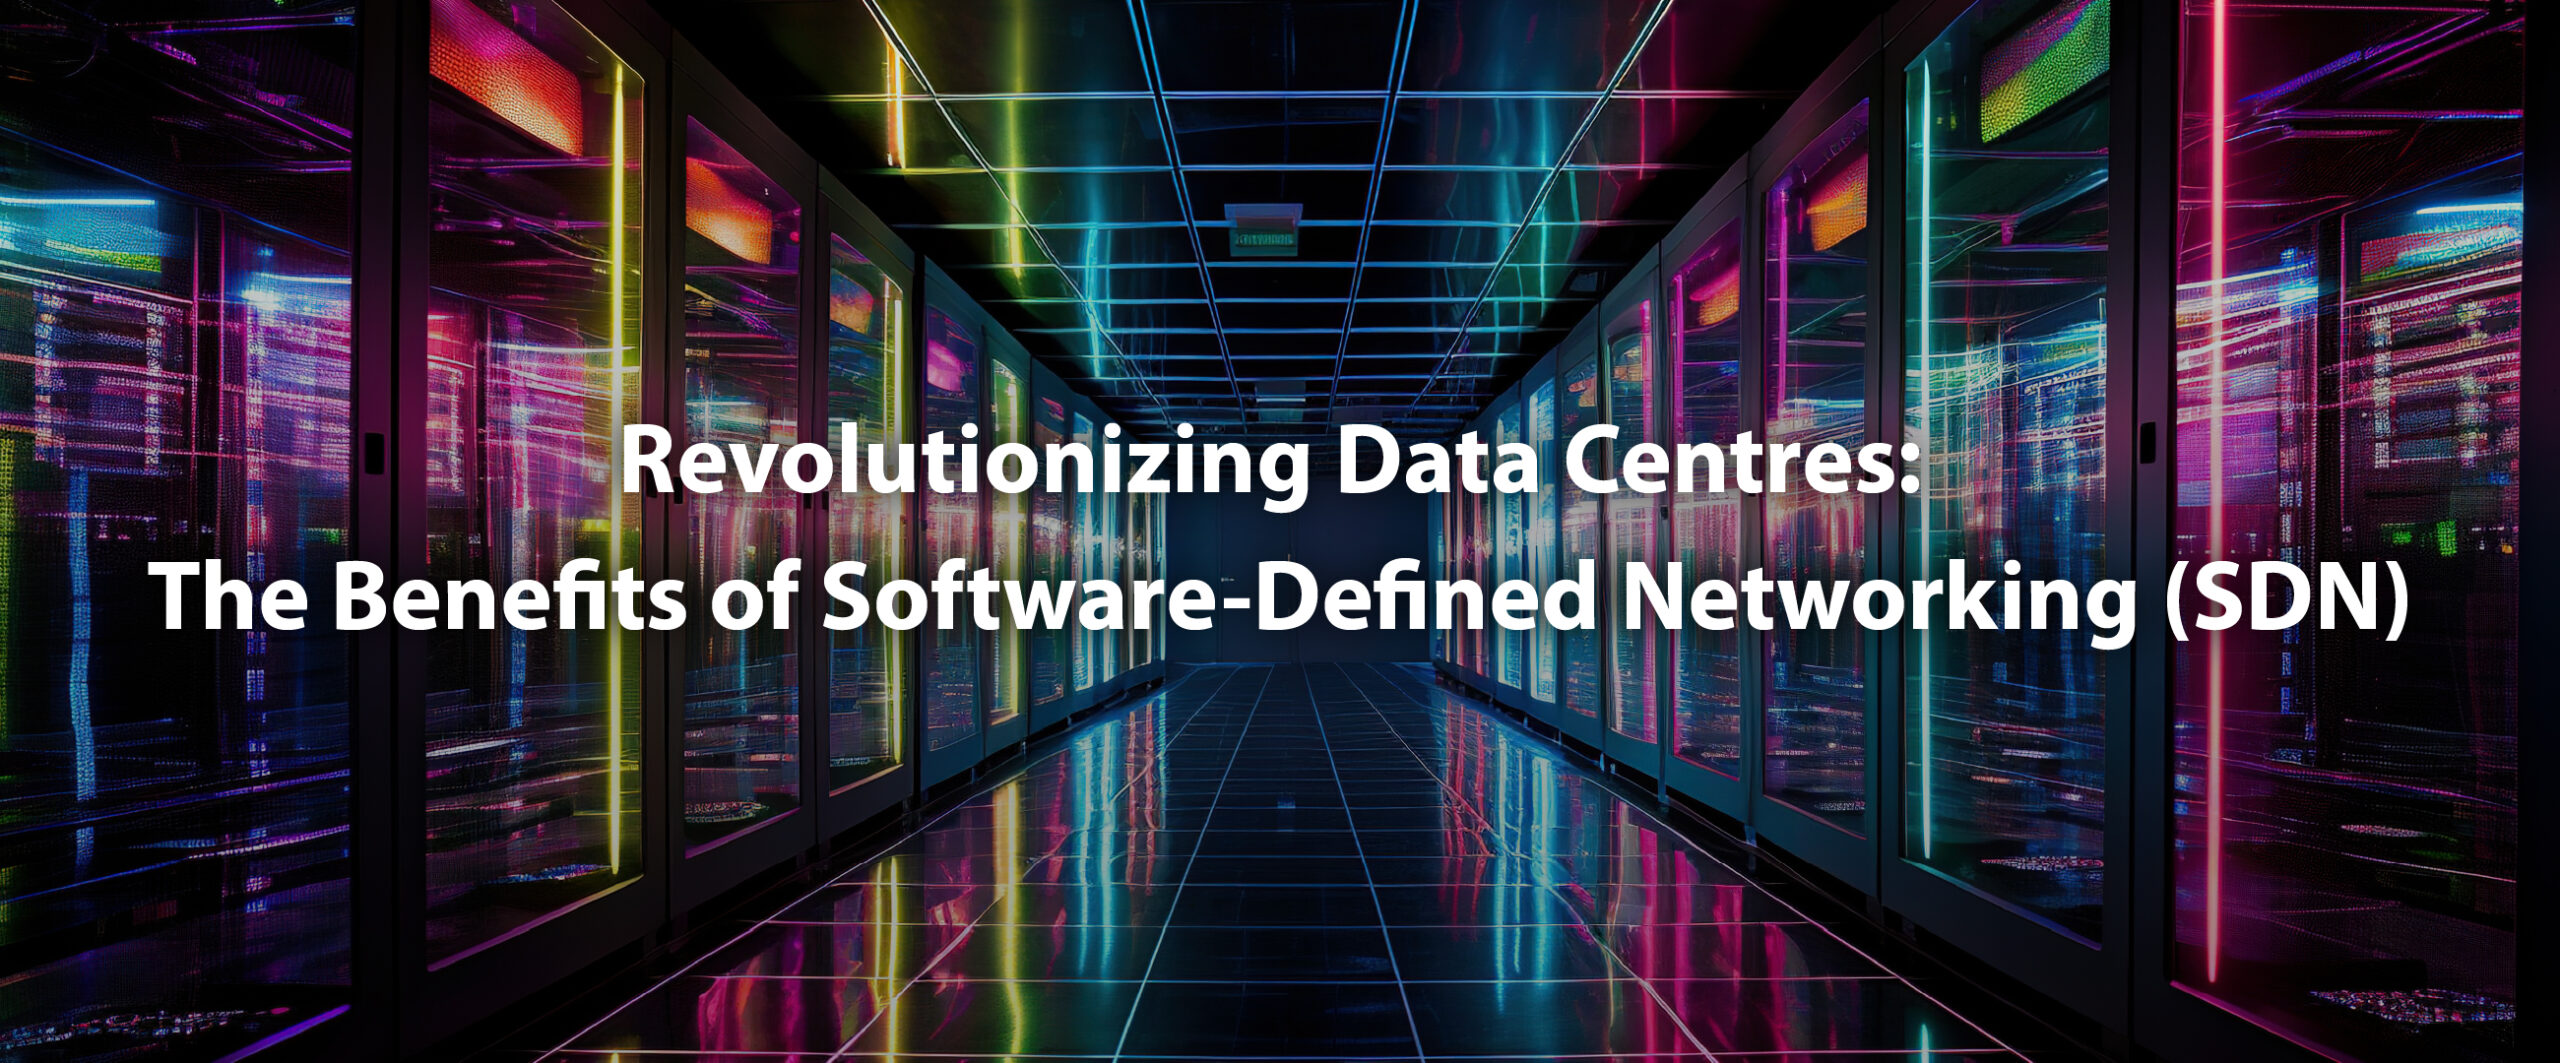 Cover image for the article "Revolutionizing Data Centres: The Benefits of Software-Defined Networking (SDN)"